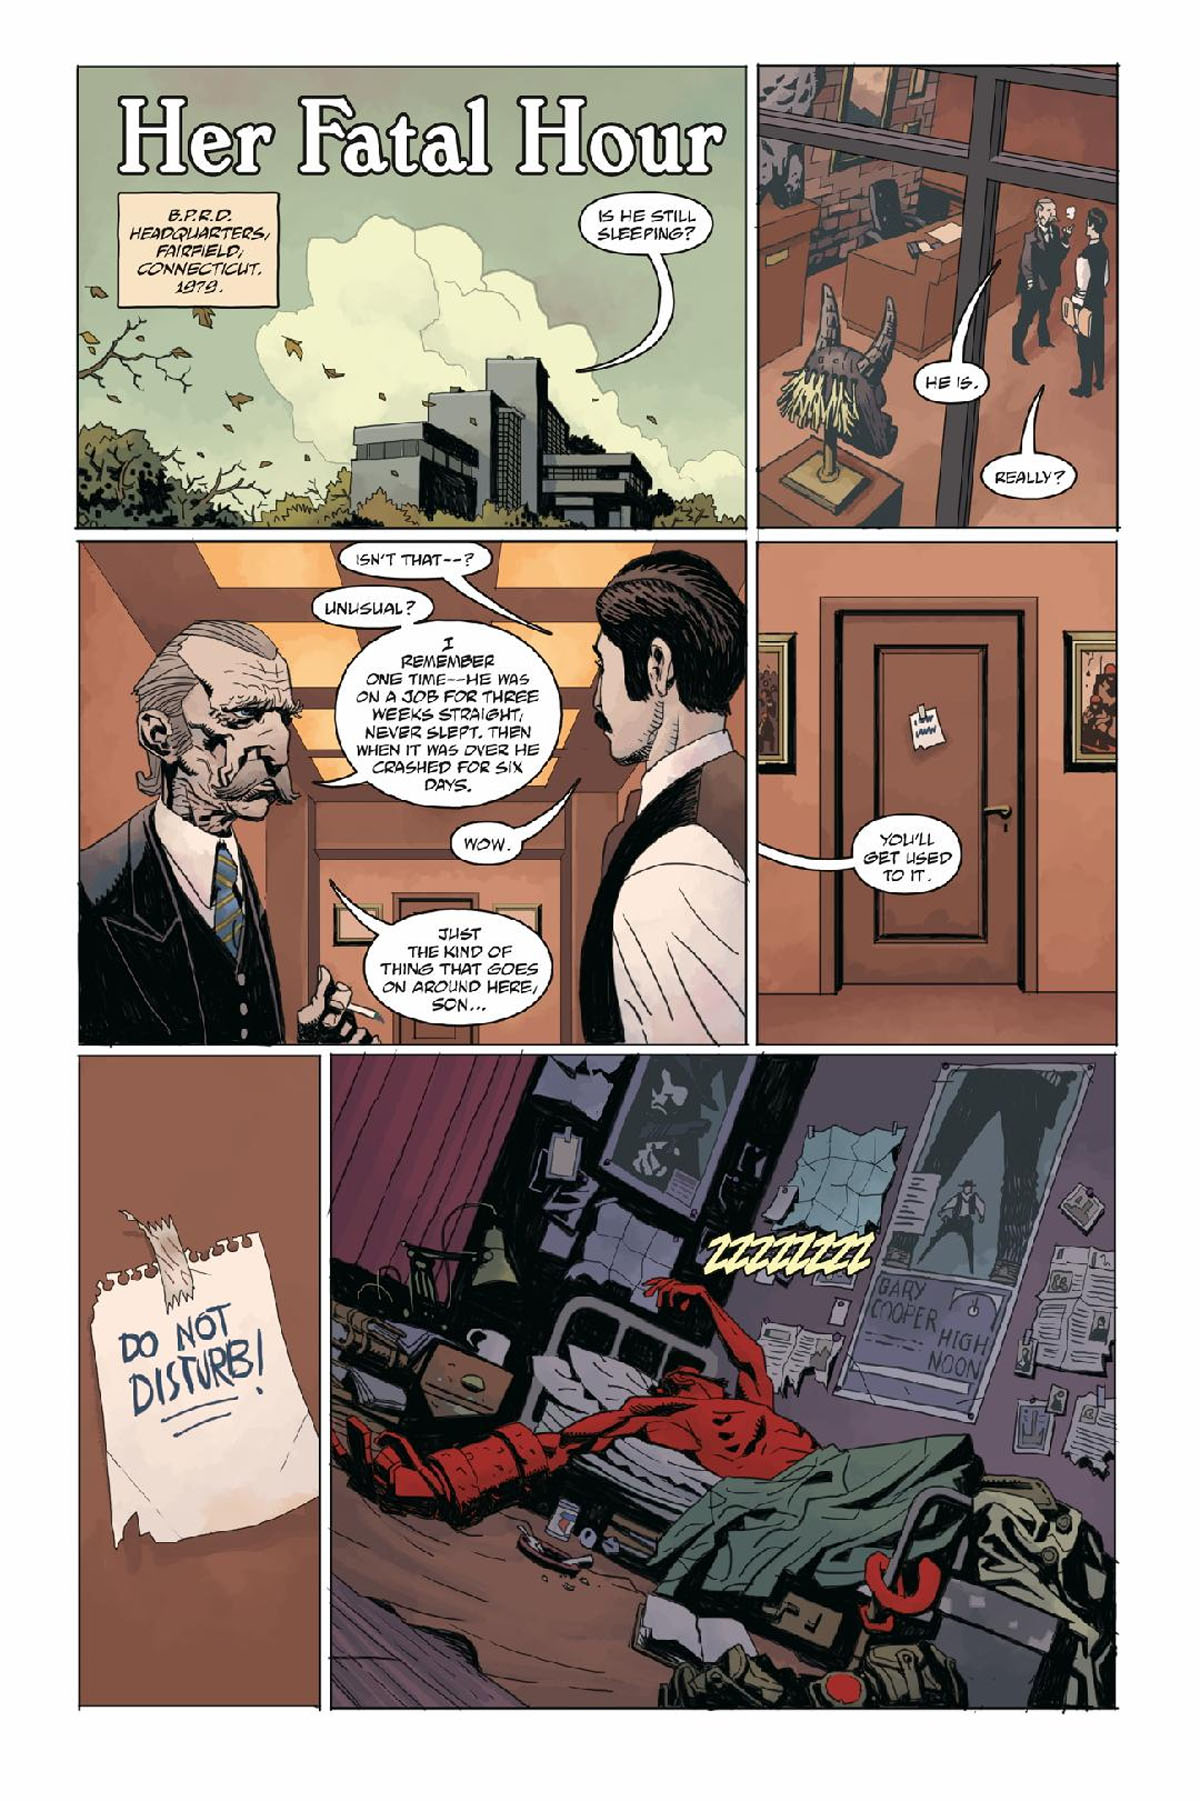 Hellboy and the BPRD: Her Fatal Hour #1 page 1